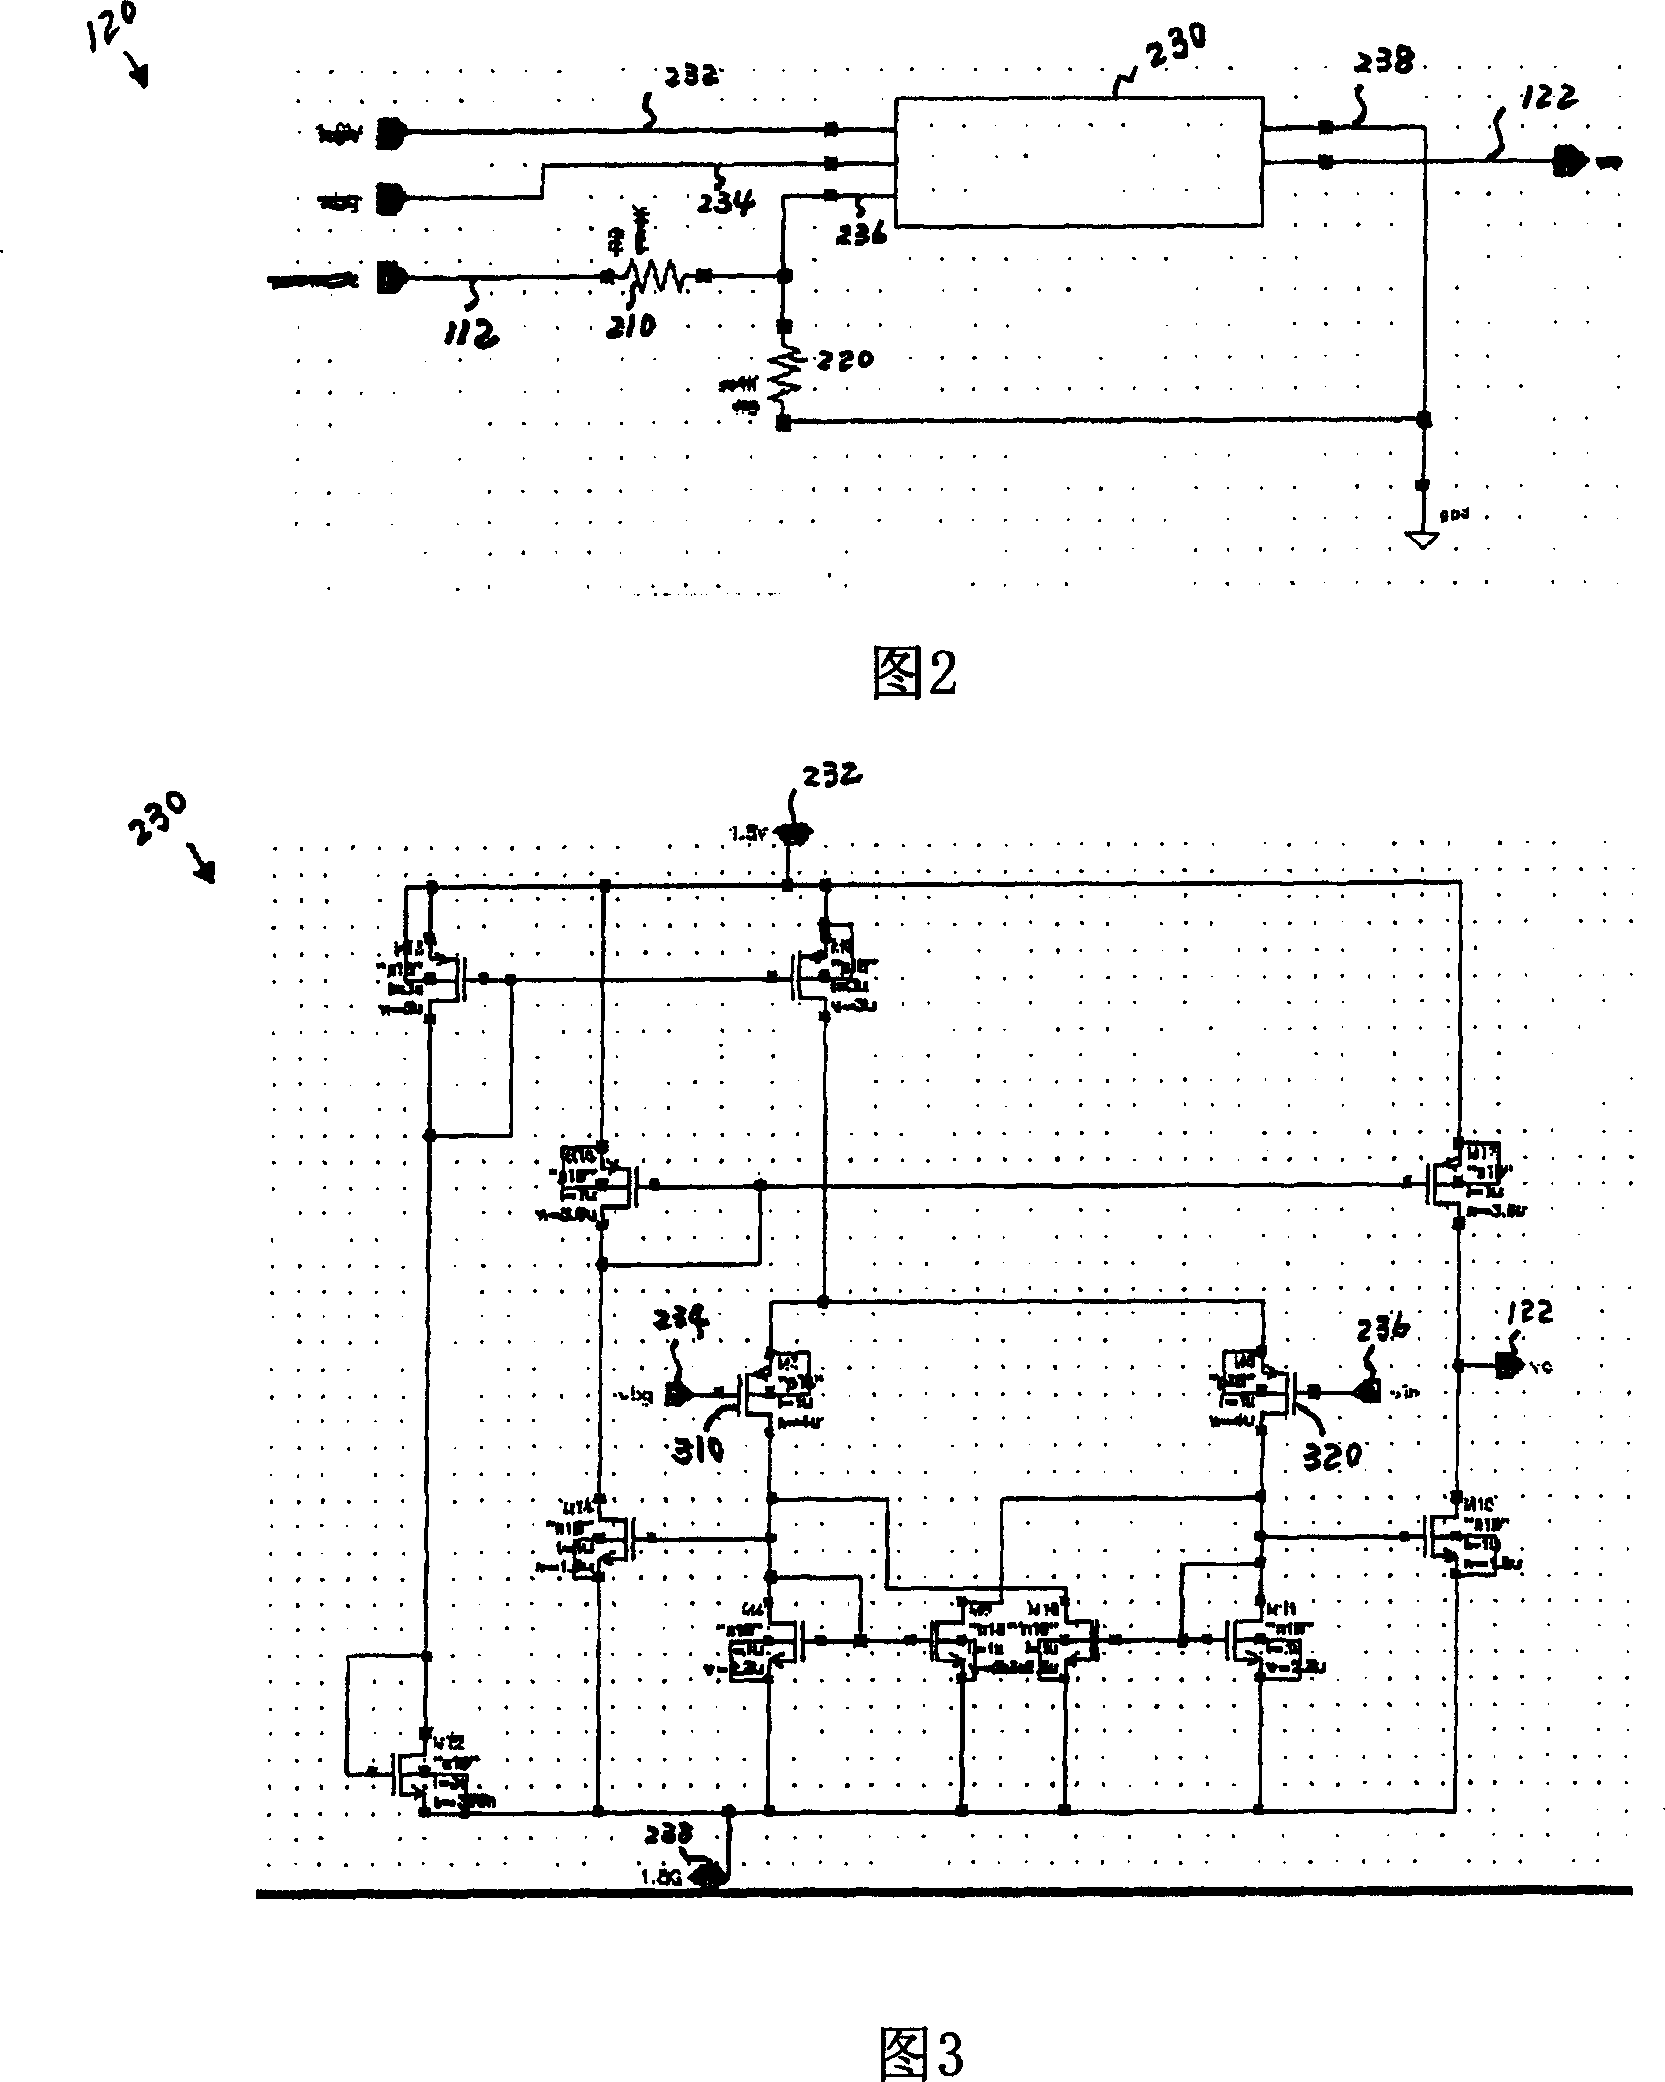 Power-saving system and method used for equipment based on universal series bus